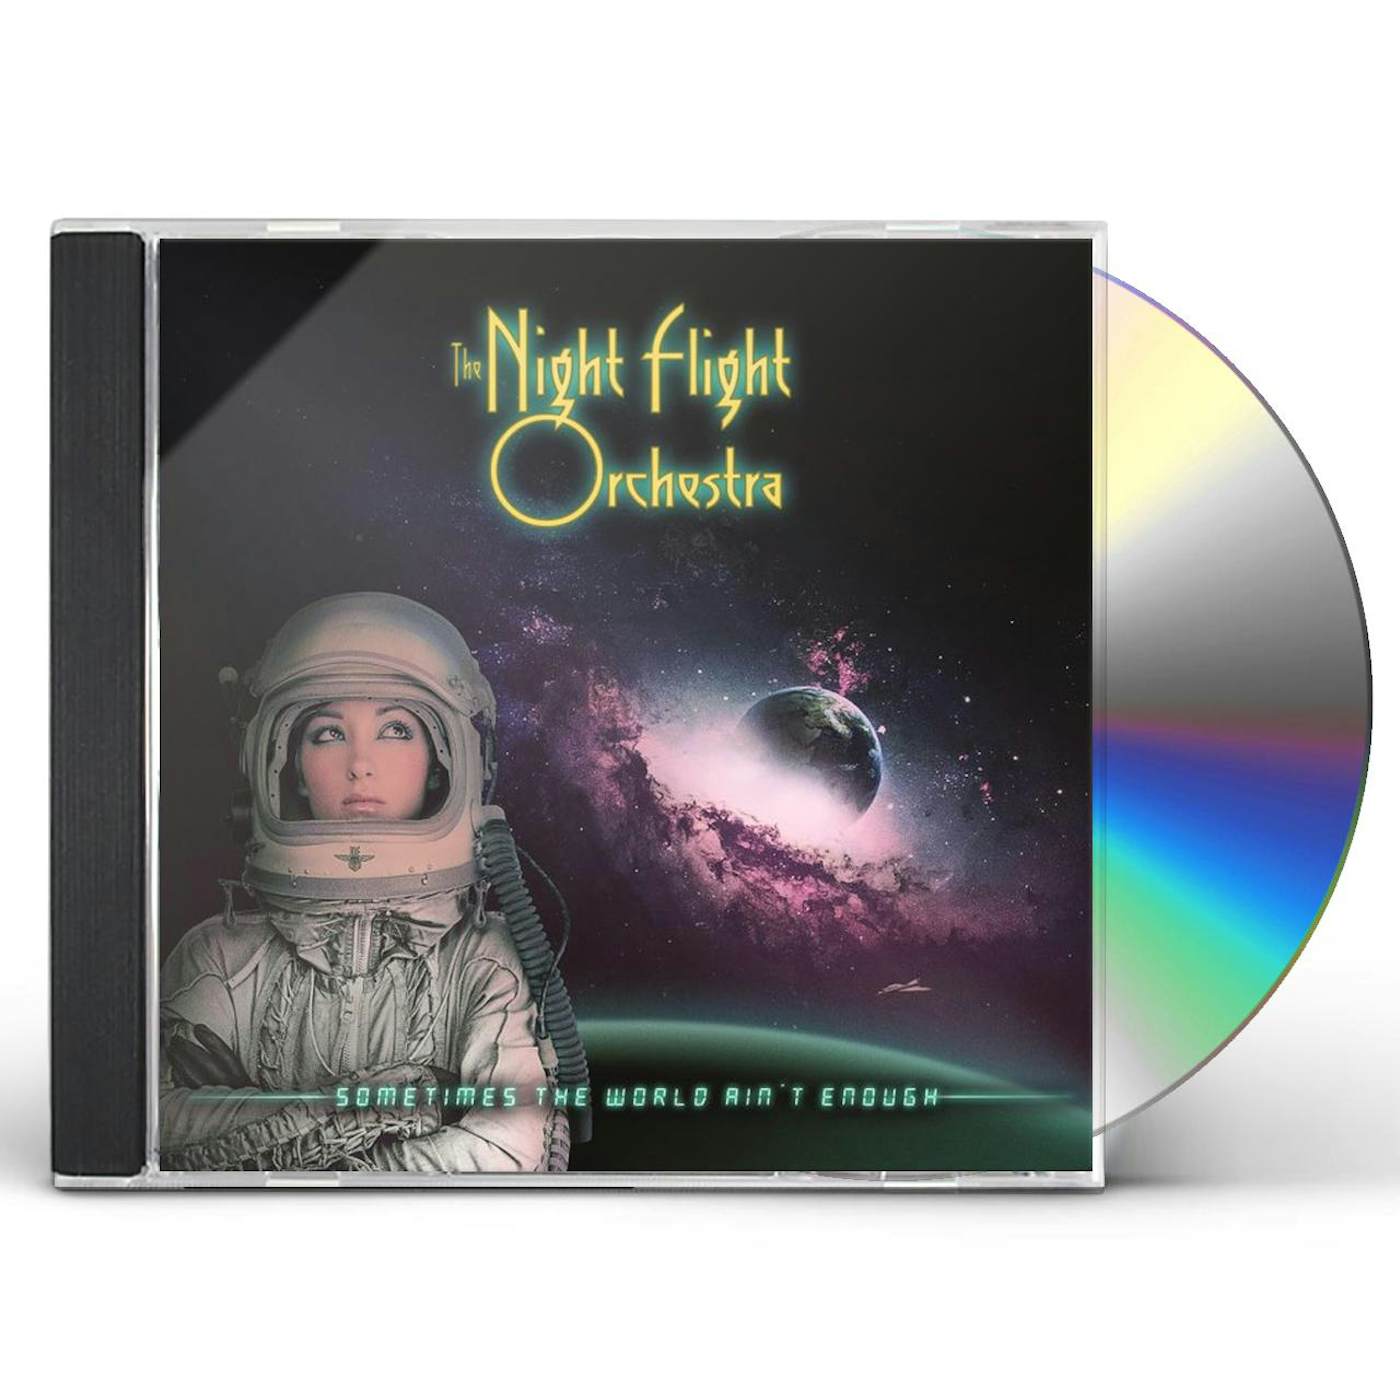 The Night Flight Orchestra SOMETIMES THE WORLD AIN'T ENOUGH CD